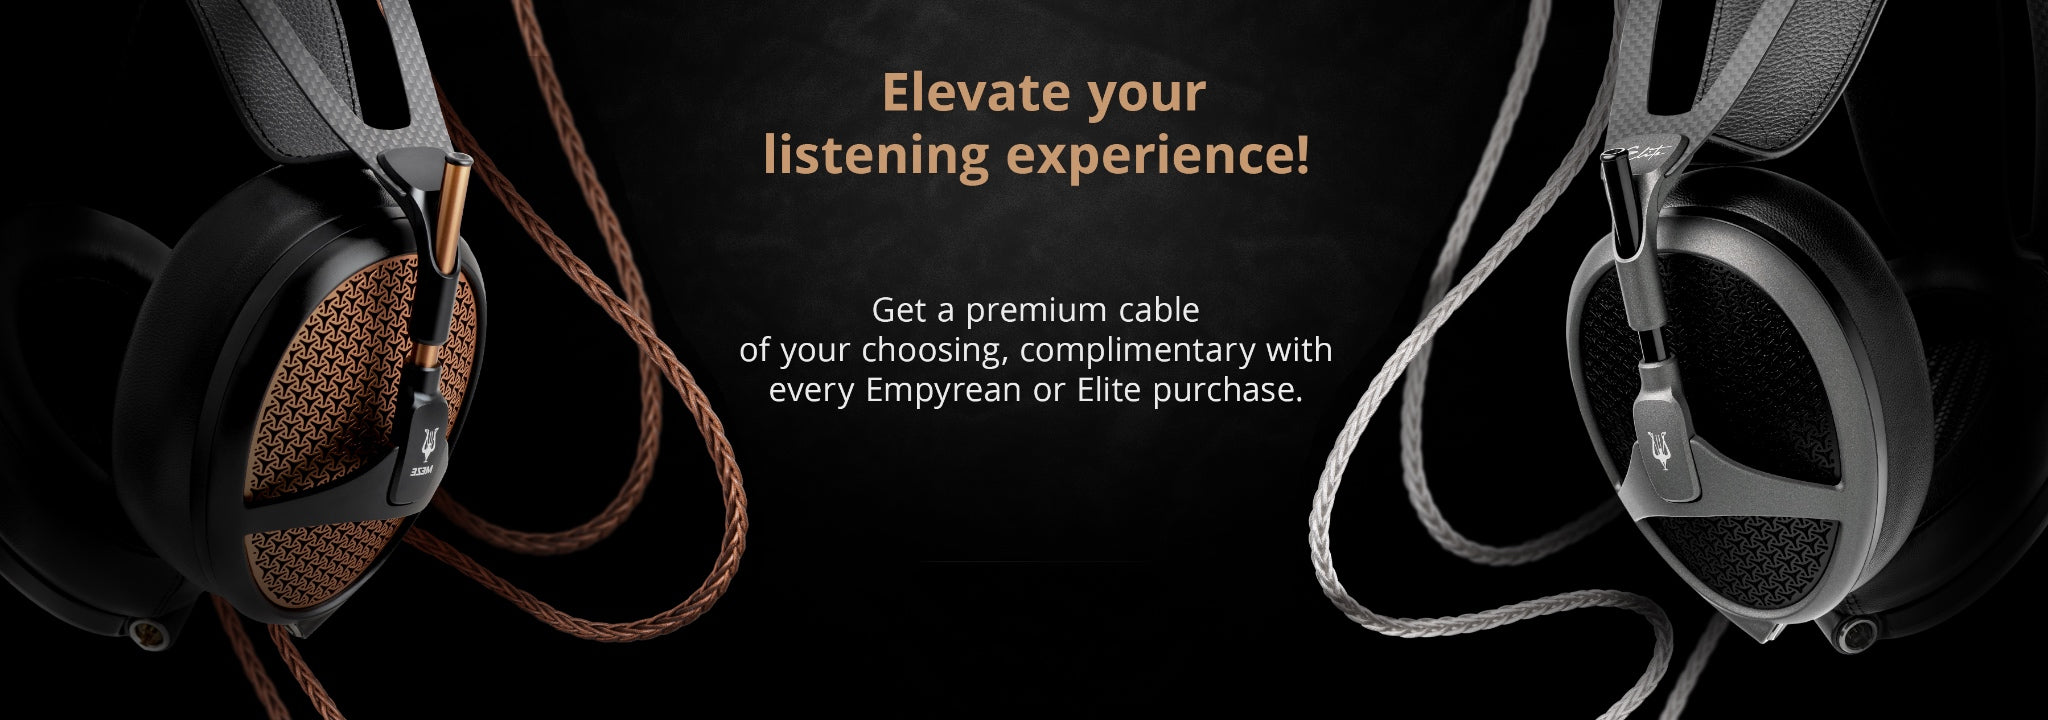 Meze Audio Elite and Empyrean cable upgrade promo banner